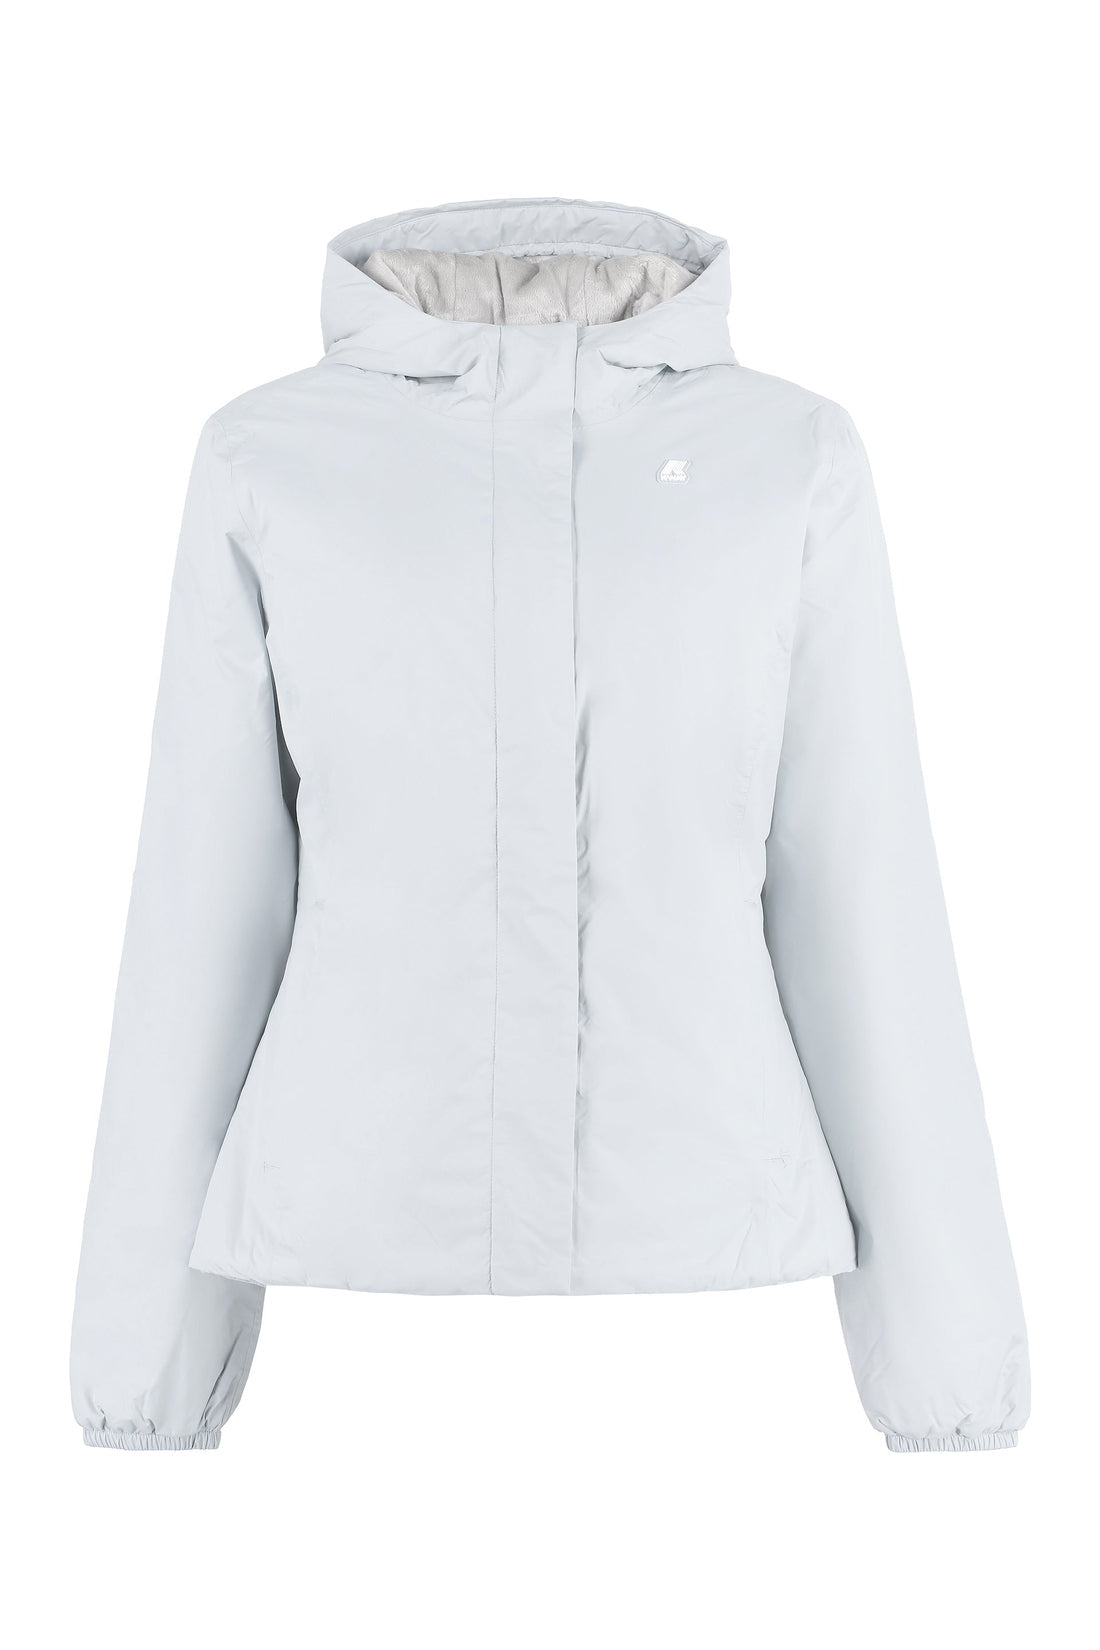 K-Way-OUTLET-SALE-Lily hooded puffer jacket-ARCHIVIST